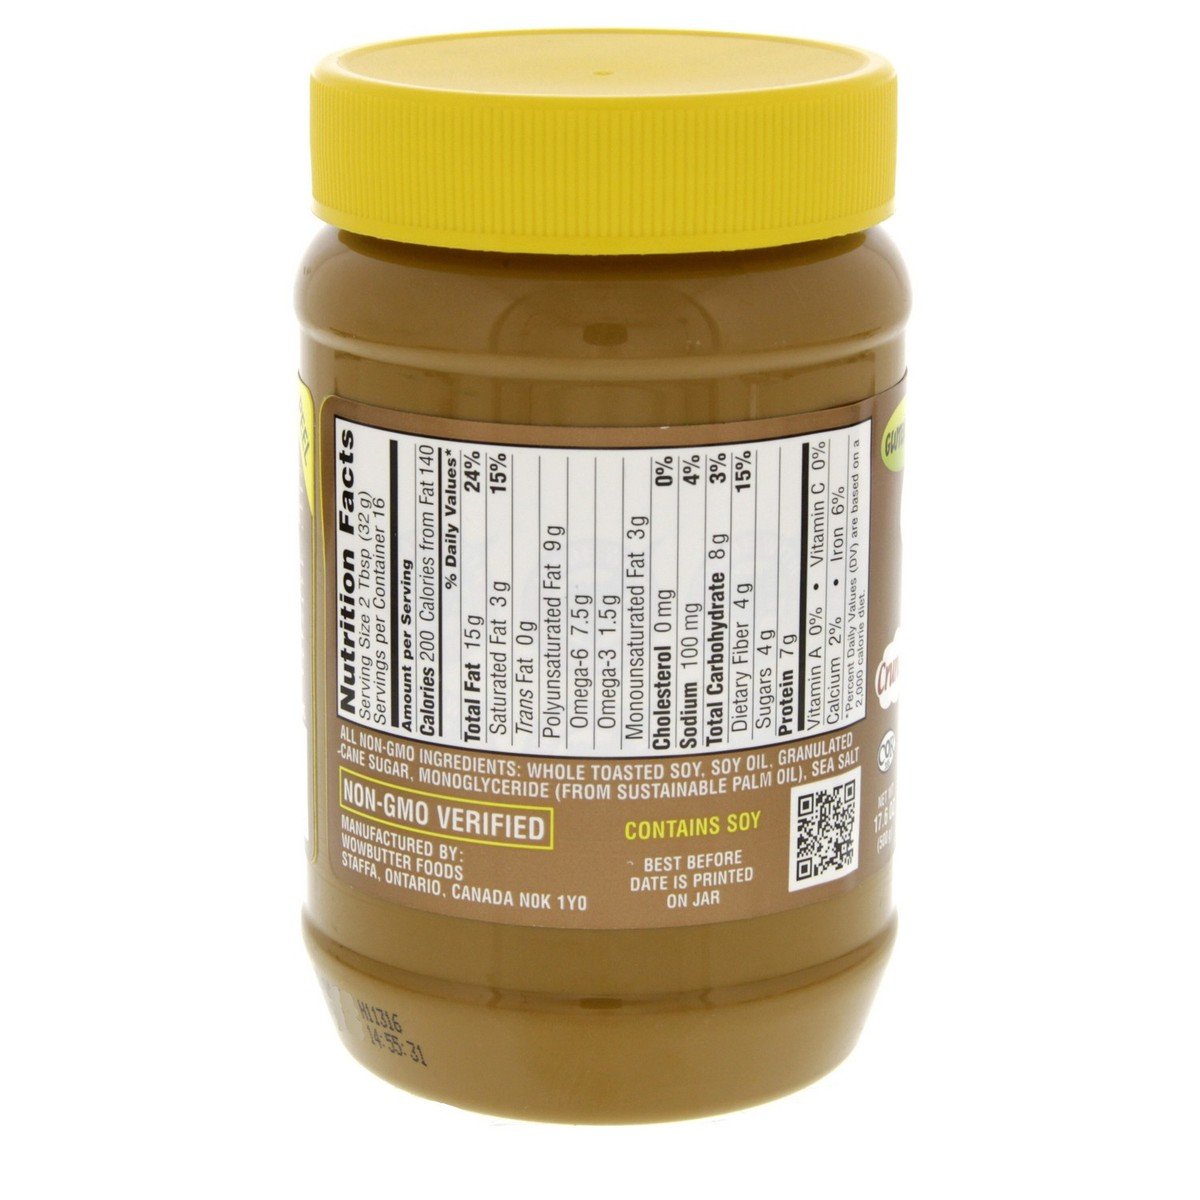 Wow Butter Crunchy Toasted Soy Spread Gluten Free 500 g